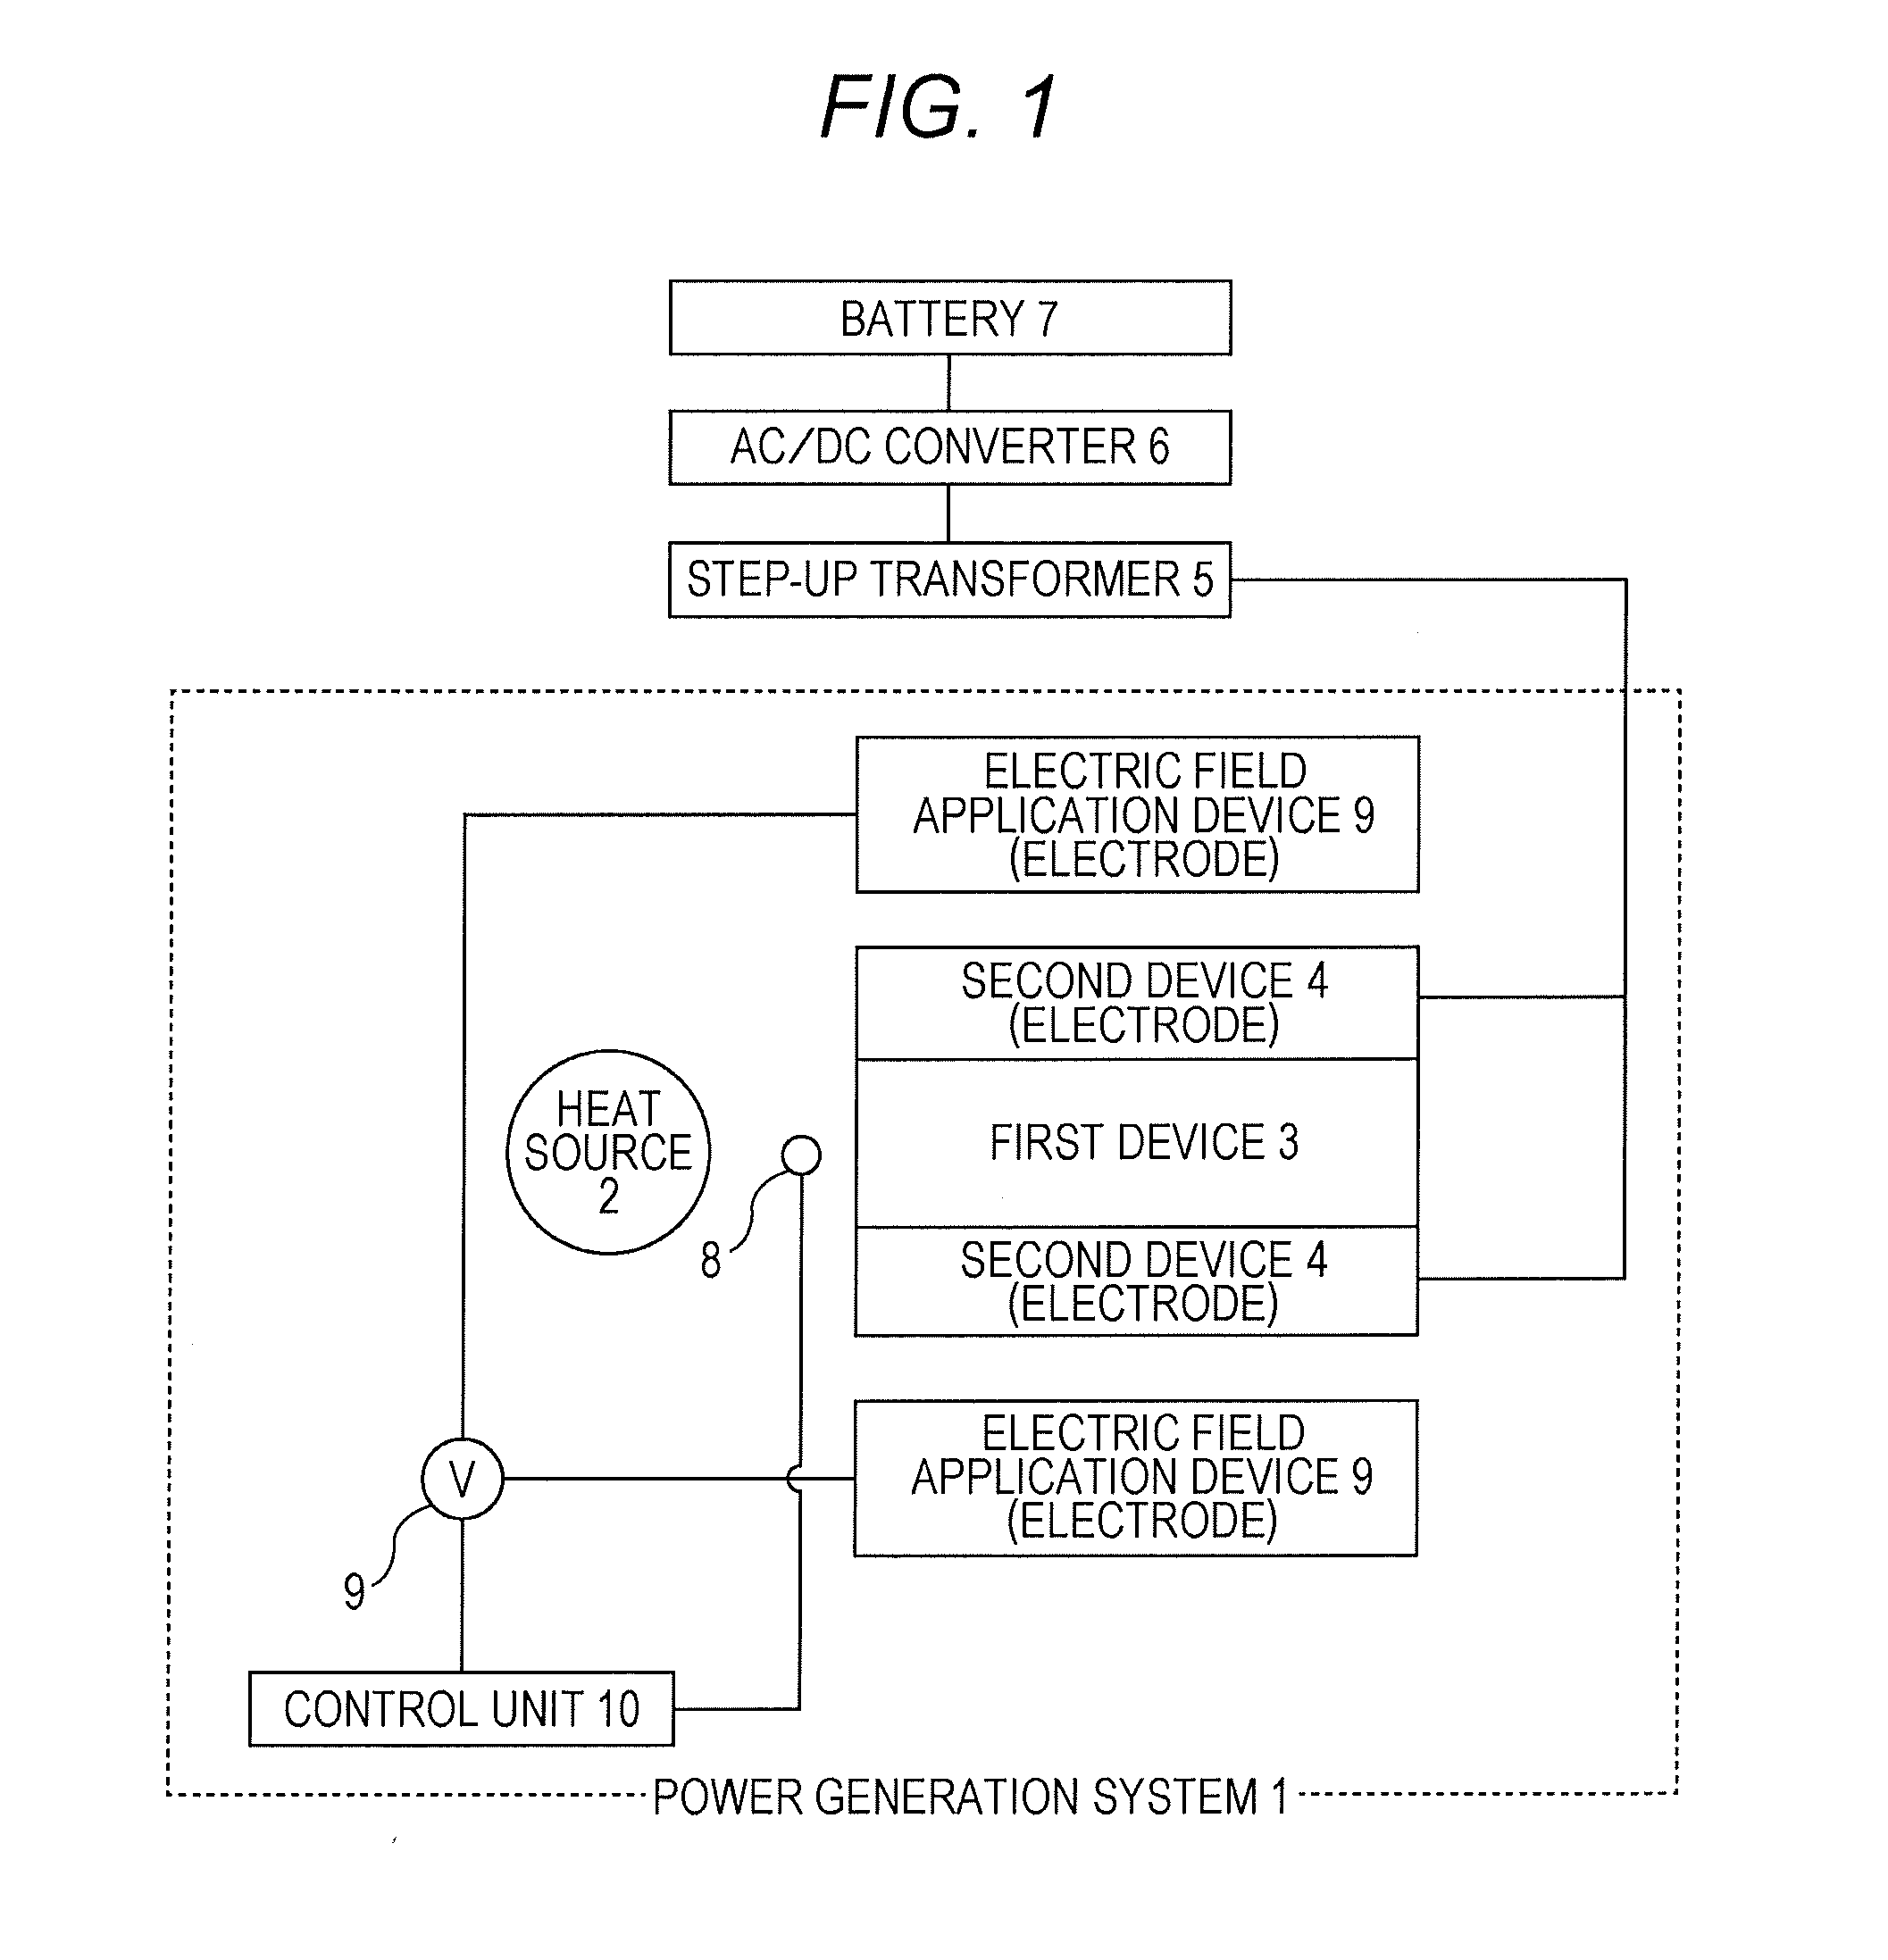 Power generation material, power generation element, and power generation system